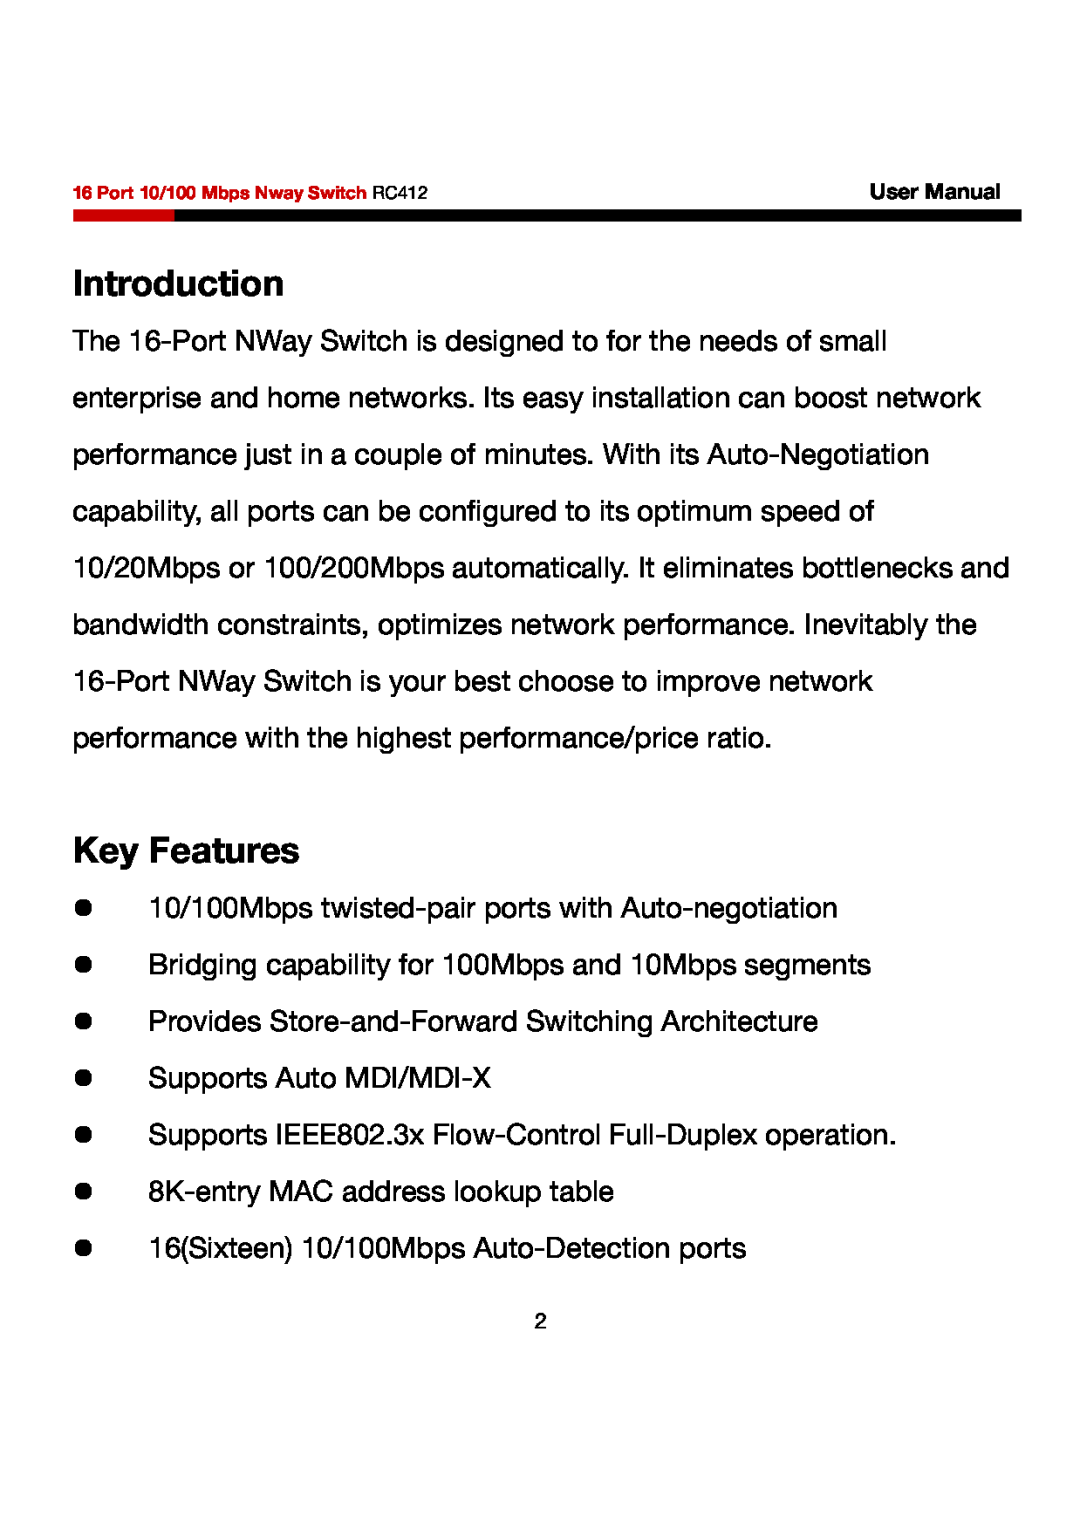 Rosewill RC412 user manual Introduction, Key Features 